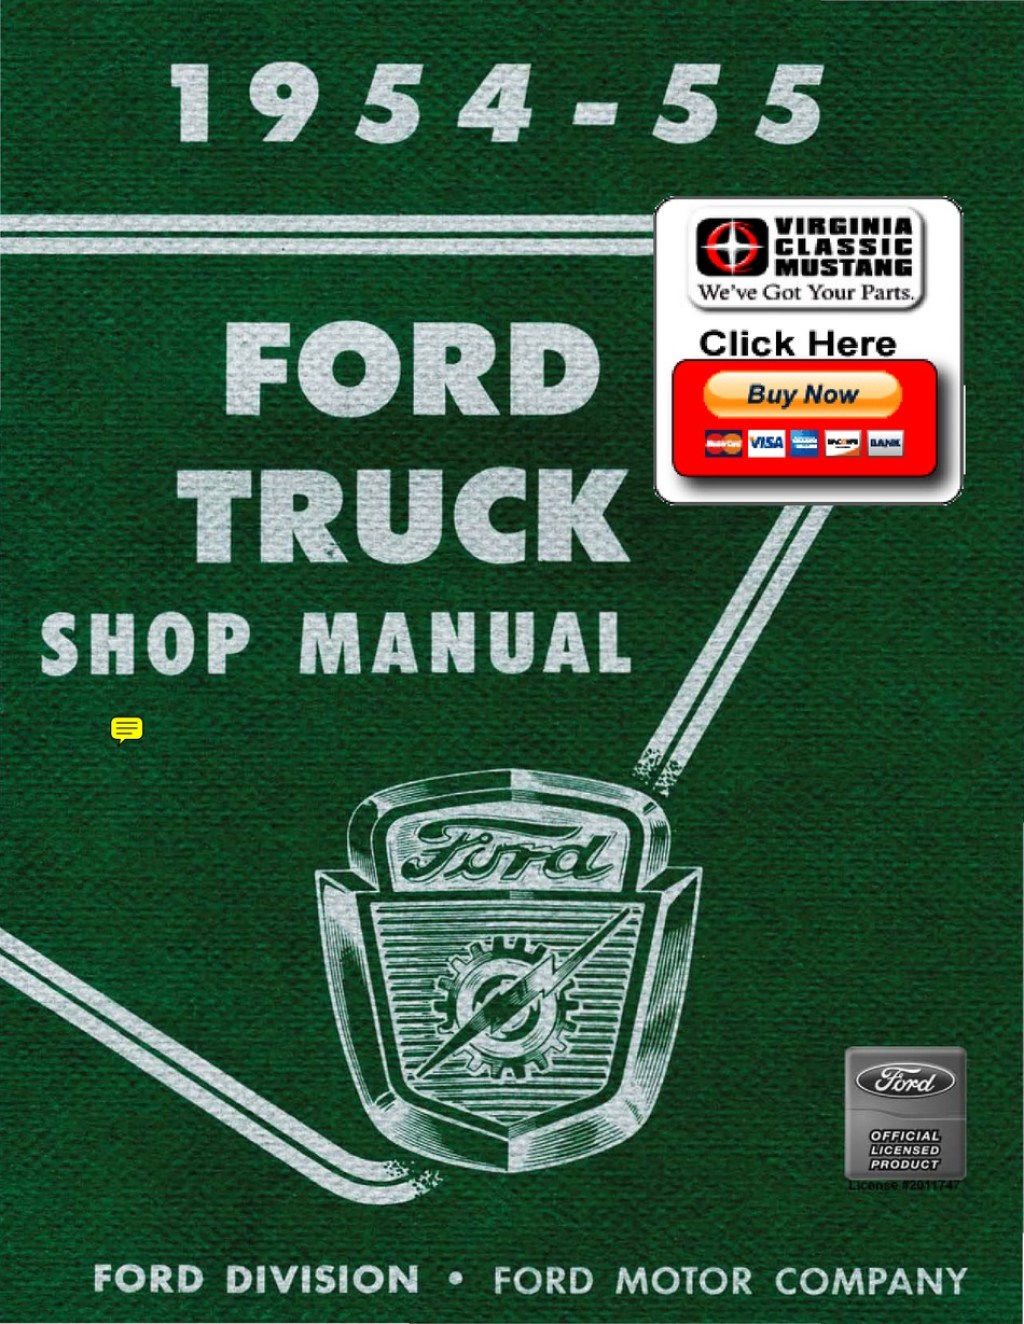 Picture of: FORD – F-SERIES TRUCK SHOP MANUAL Pdf Download  ManualsLib